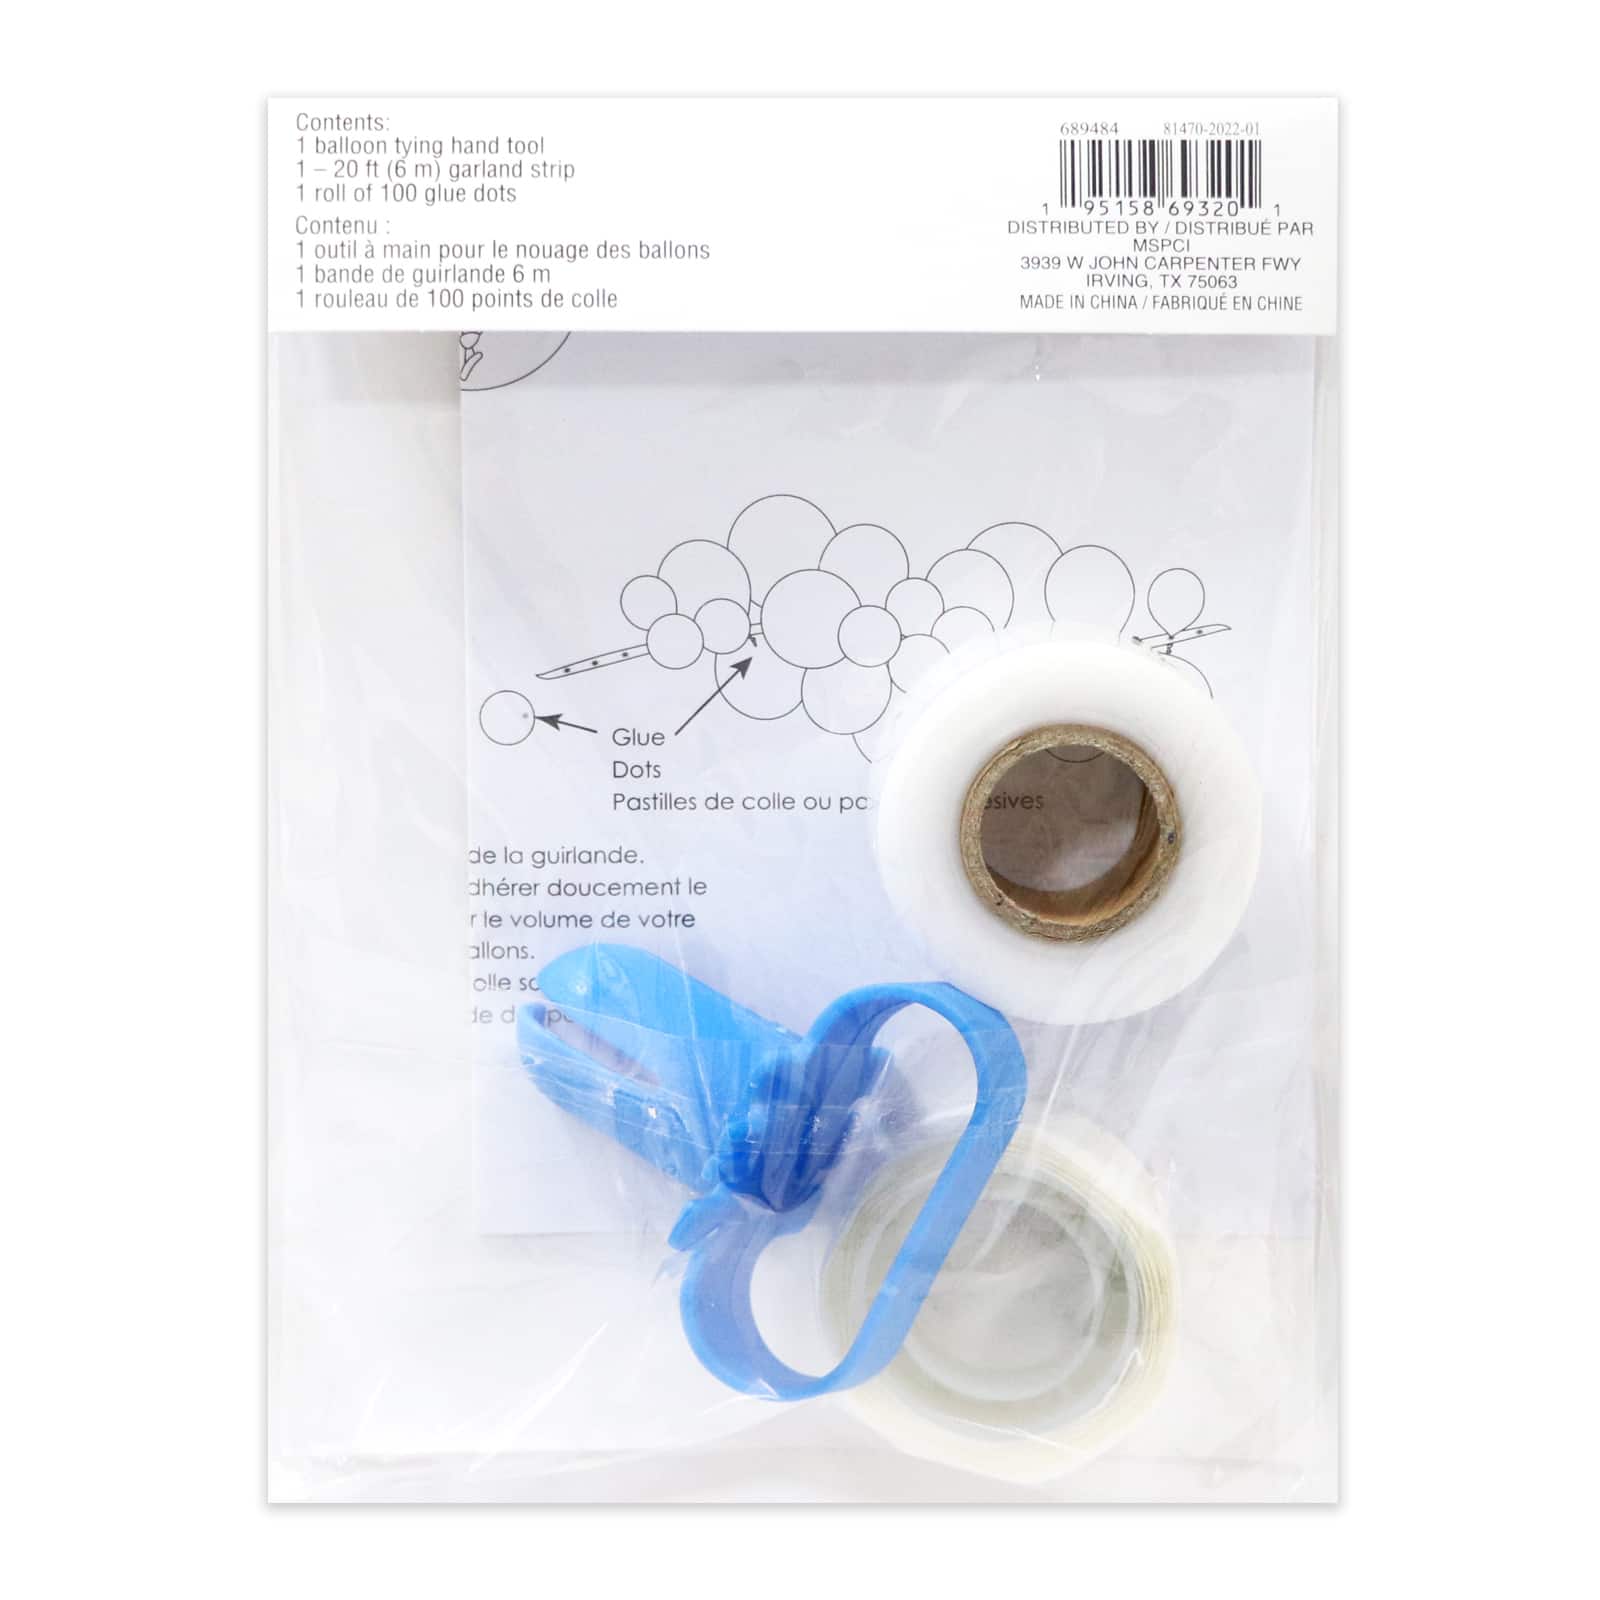  Collectivemed Balloon Decorating Strip Kit For Garland